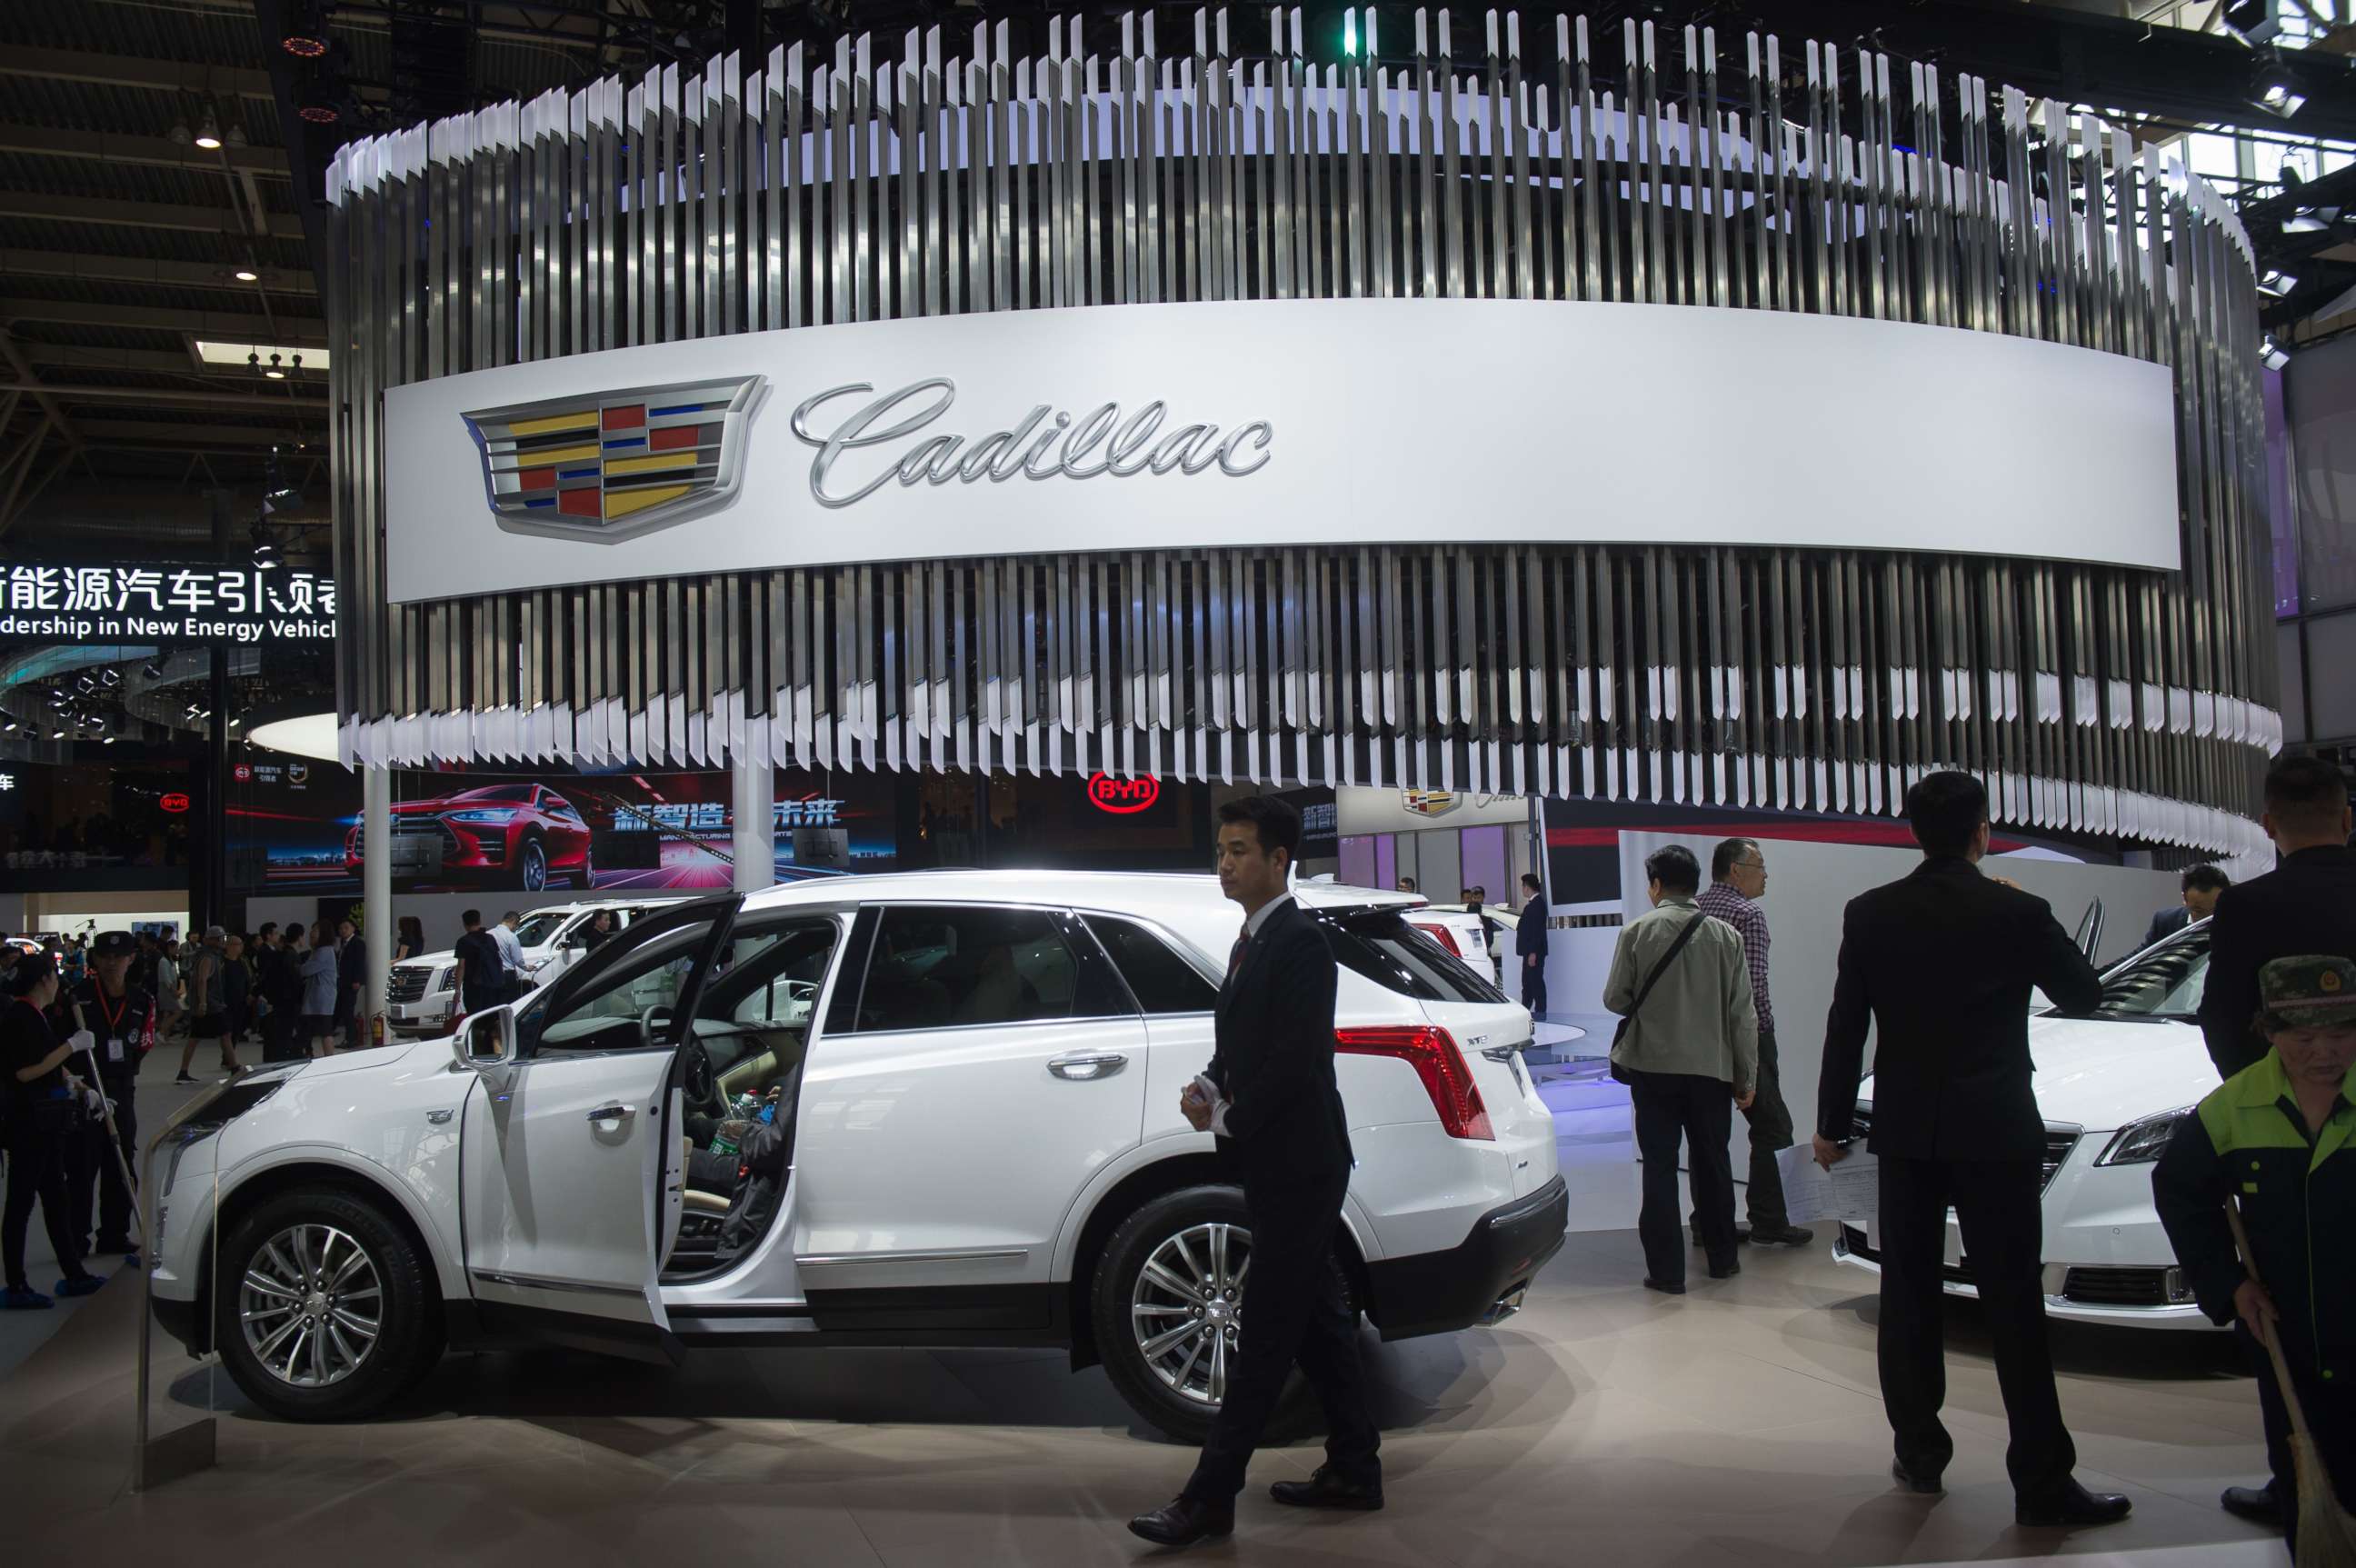 PHOTO: People walk through the Cadillac car display during the Beijing Auto Show in Beijing on April 25, 2018.